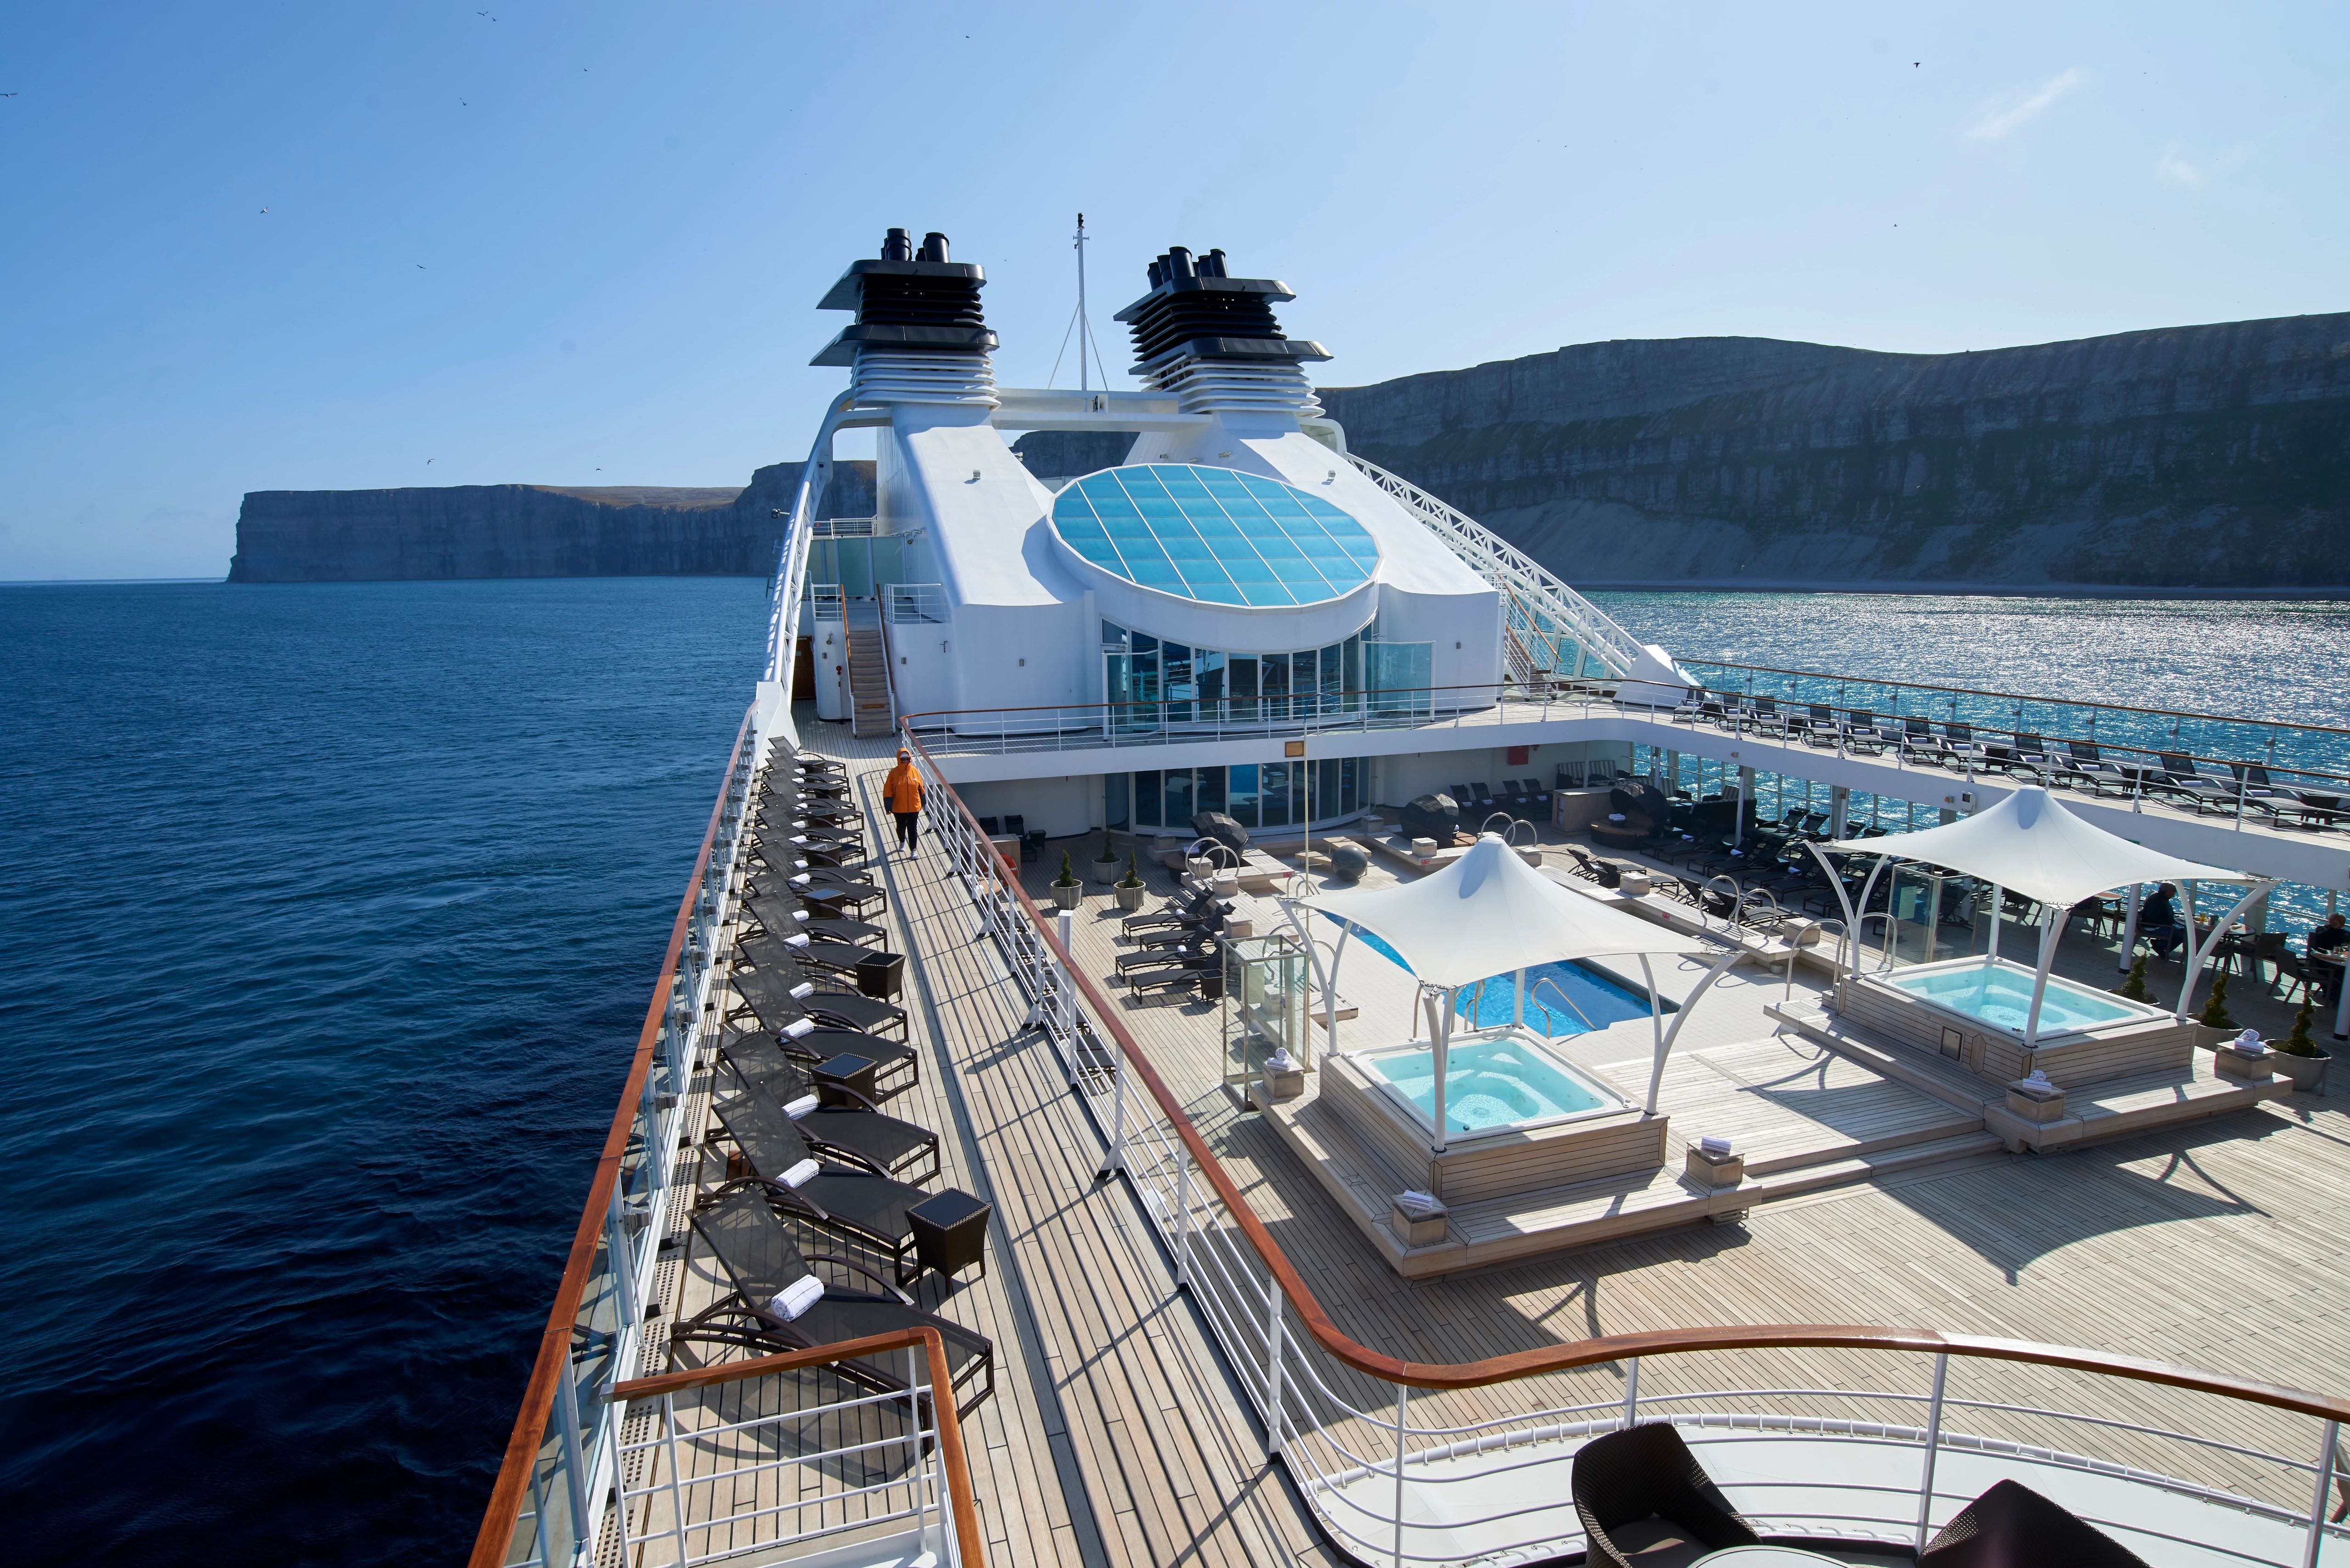 A luxurious pool deck on a Seabourn cruise ship with sun loungers and hot tubs, set against the stunning cliffs of an Alaskan fjord.